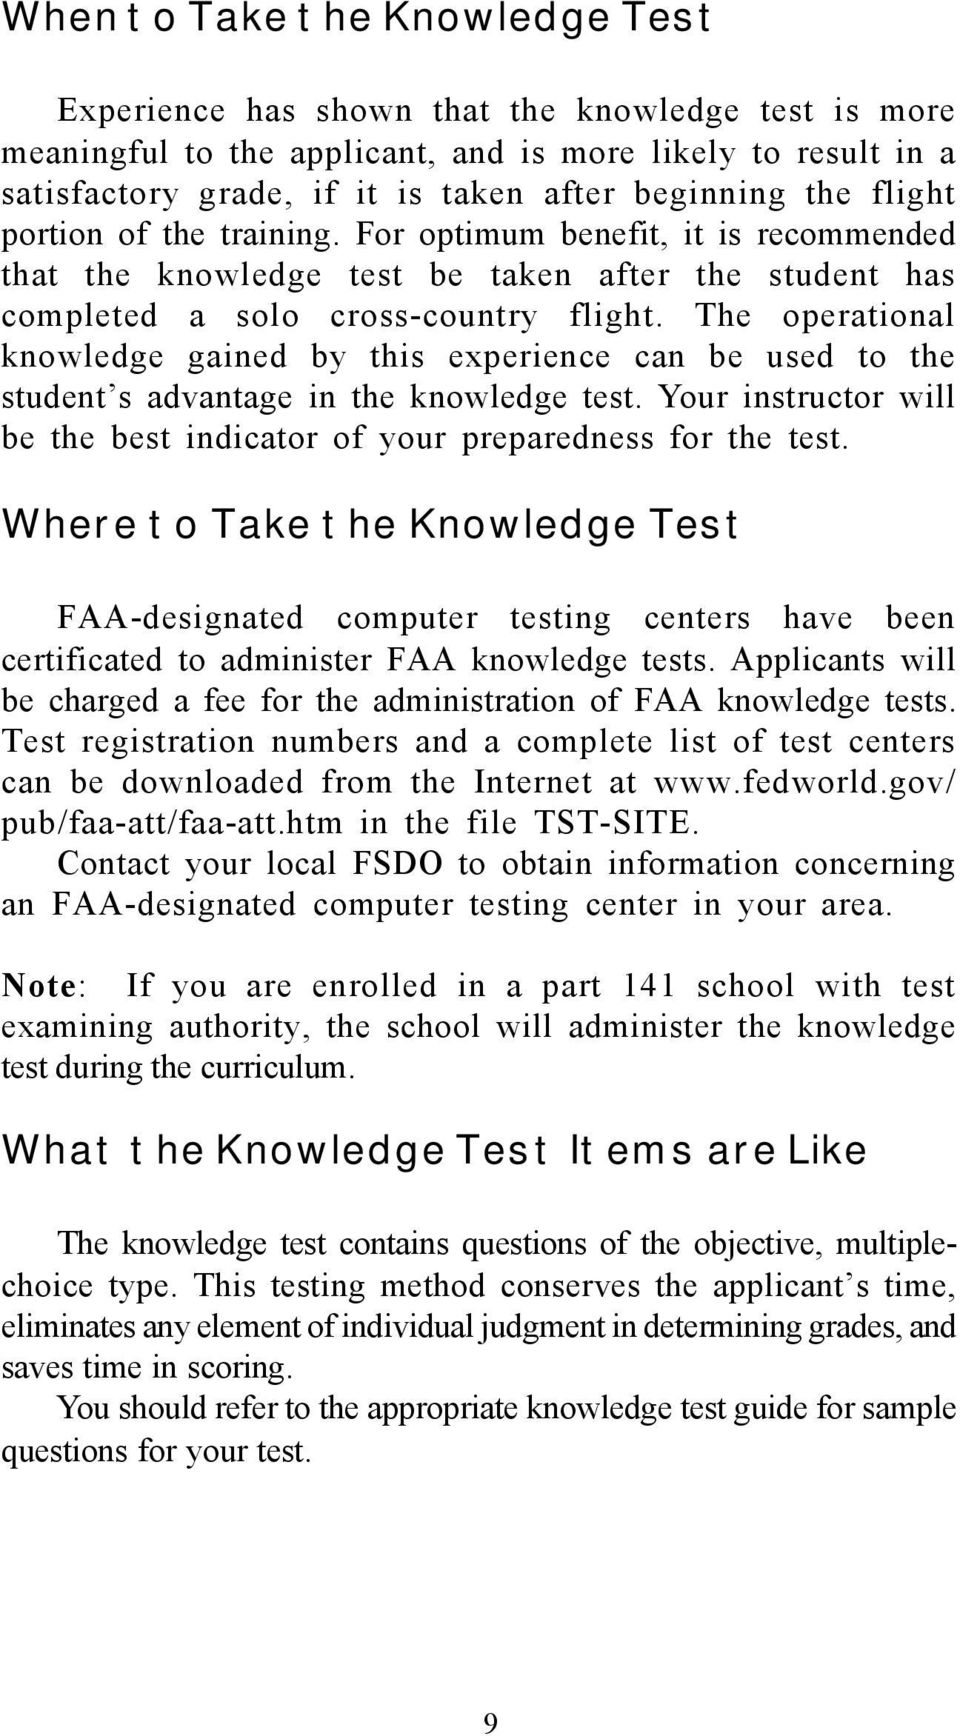 The operational knowledge gained by this experience can be used to the student s advantage in the knowledge test. Your instructor will be the best indicator of your preparedness for the test.